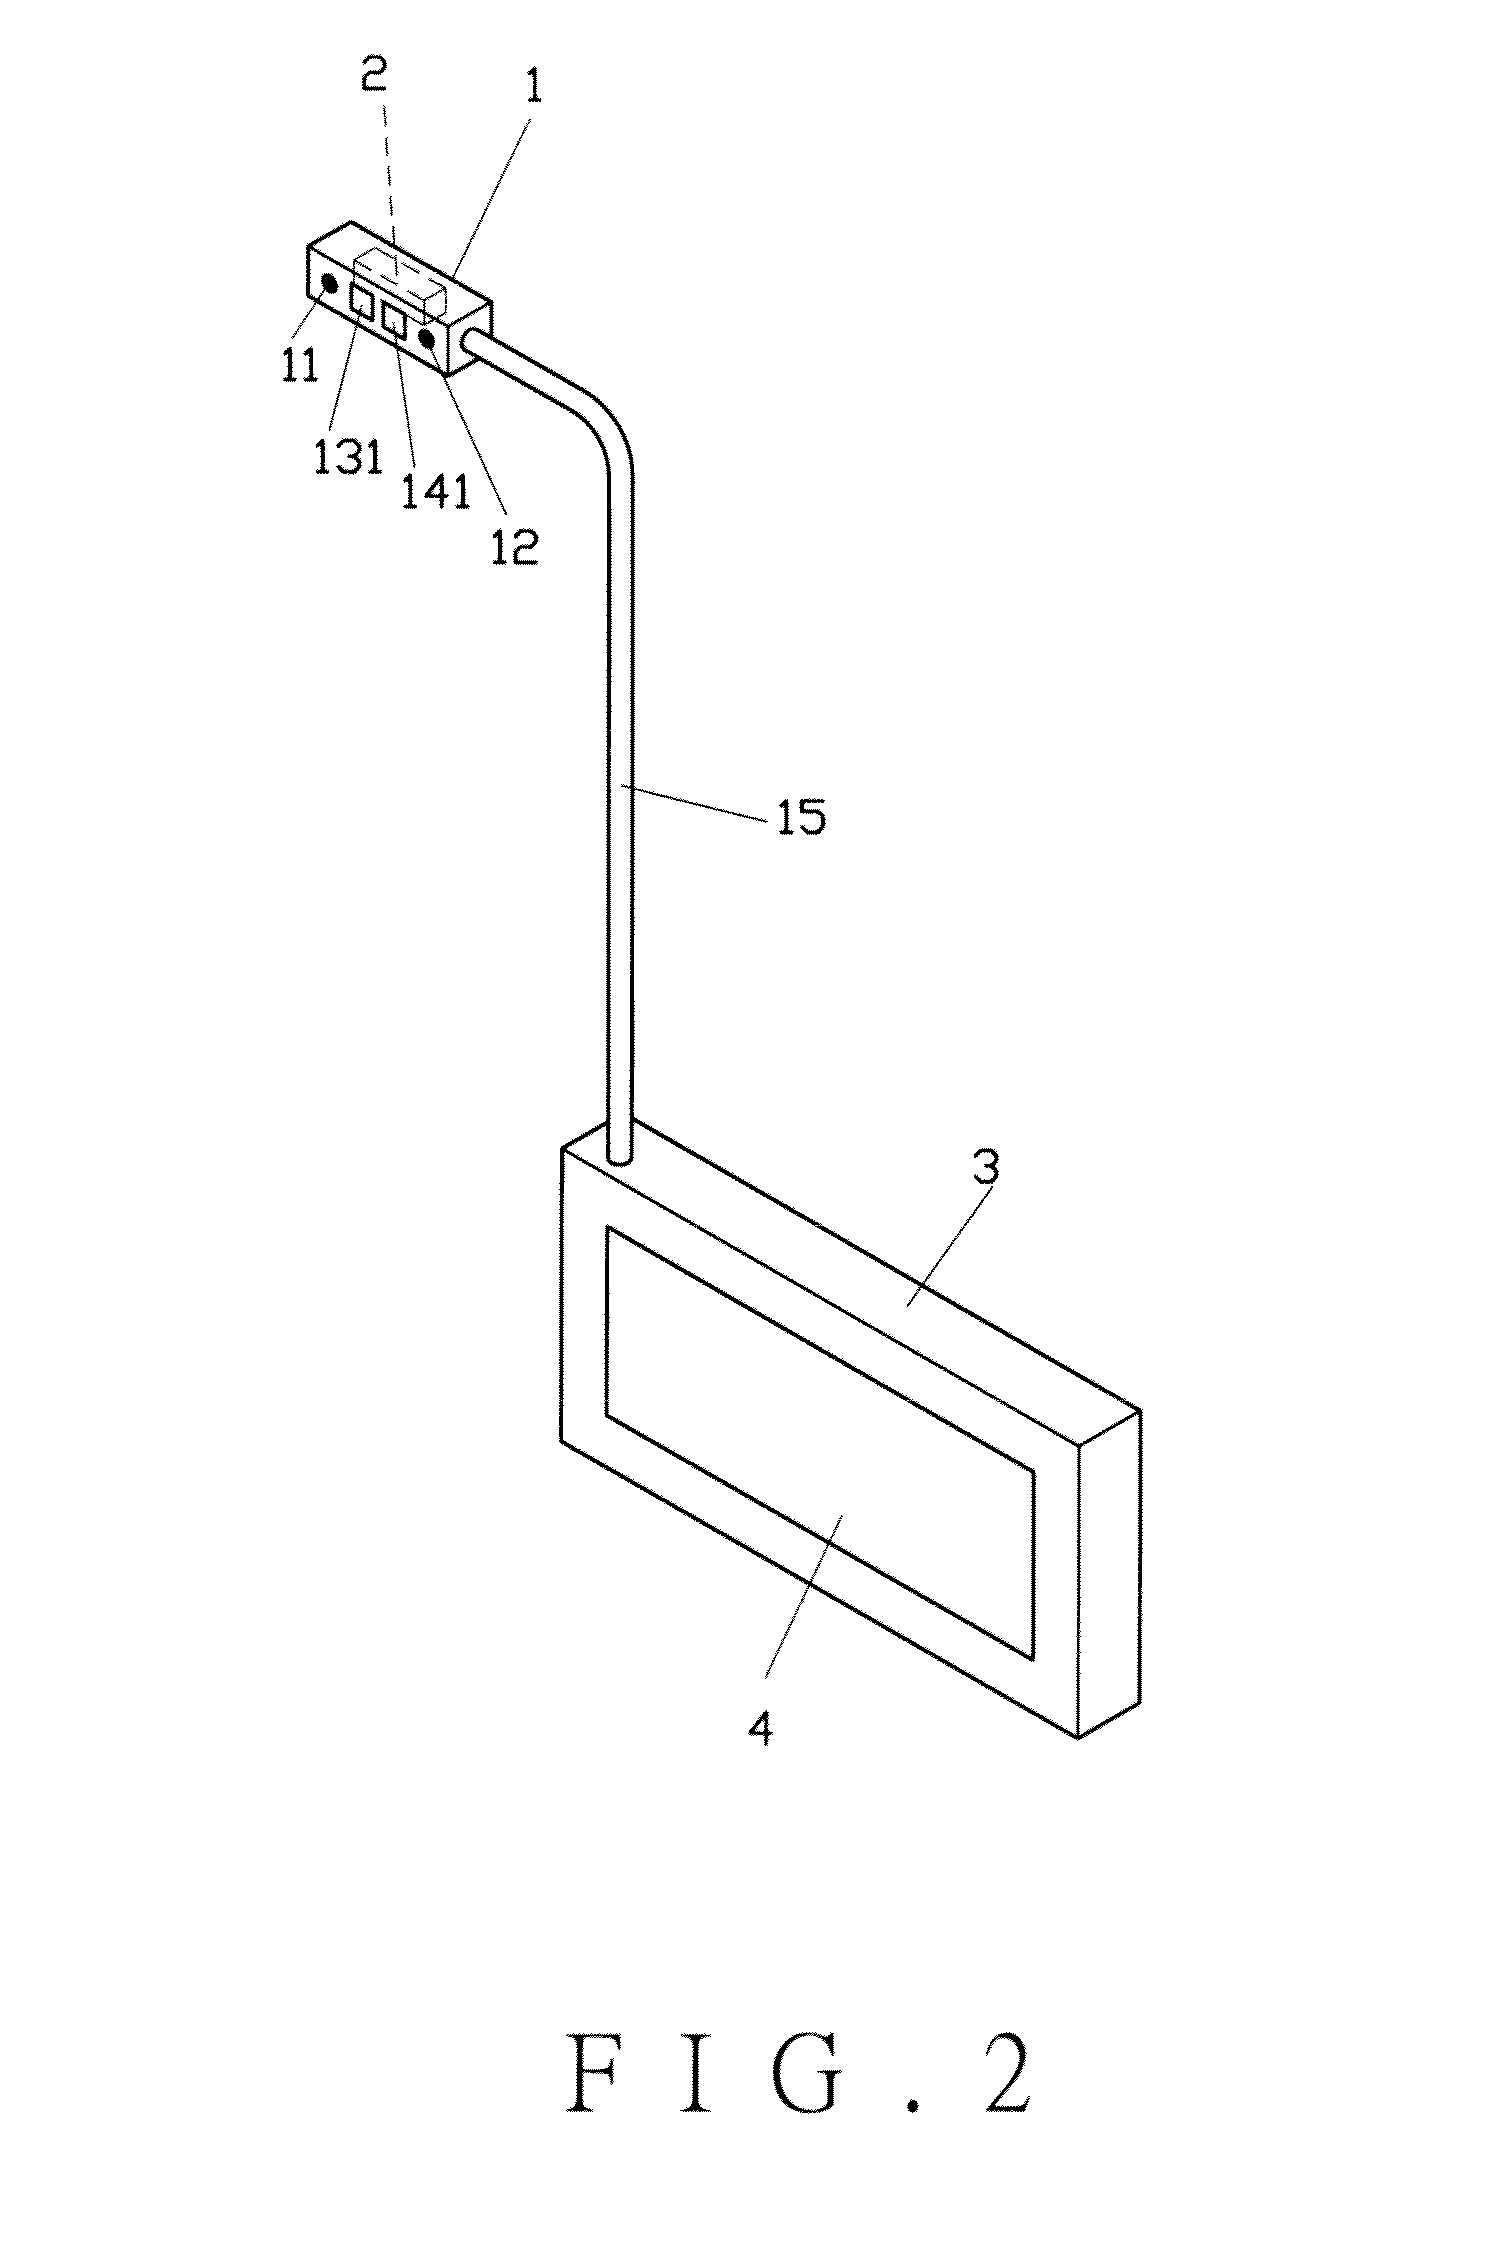 Non-invasive apparatus and method for measuring human metabolic conditions